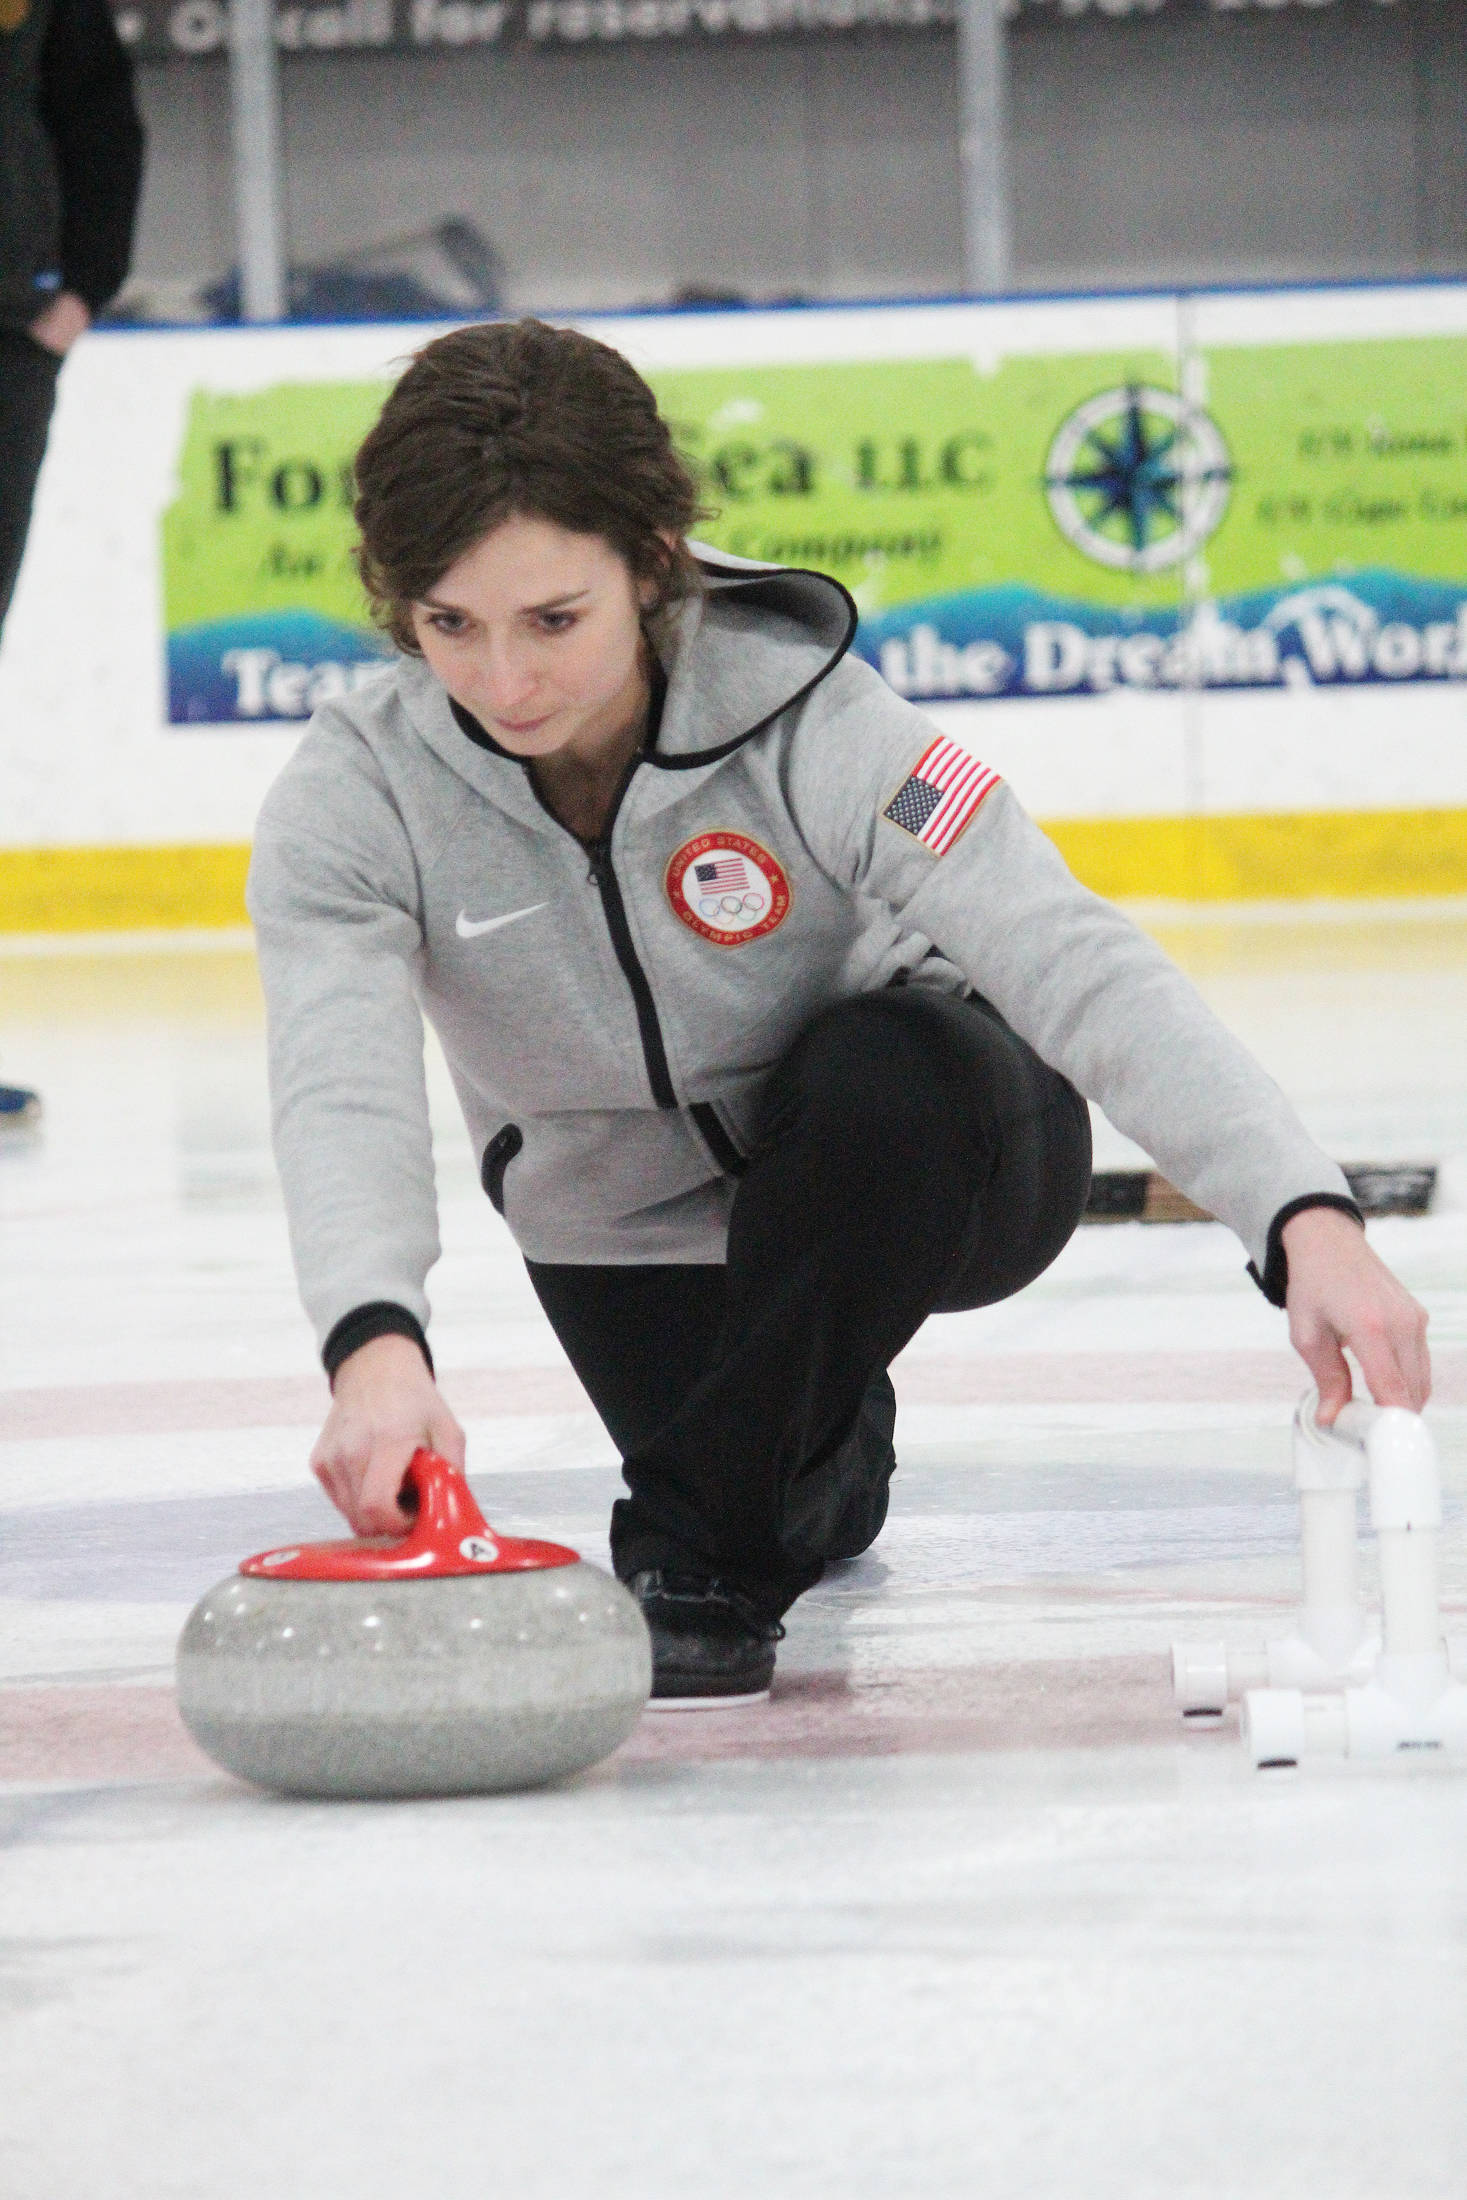 Former Olympic curler Jessica Schultz demonstrates the proper way to deliver a curling stone Saturday, Jan. 12, 2019 at the Kevin Bell Ice Arena in Homer, Alaska during a fundraiser event for the Homer Curling Club. (Photo by Megan Pacer/Homer News)